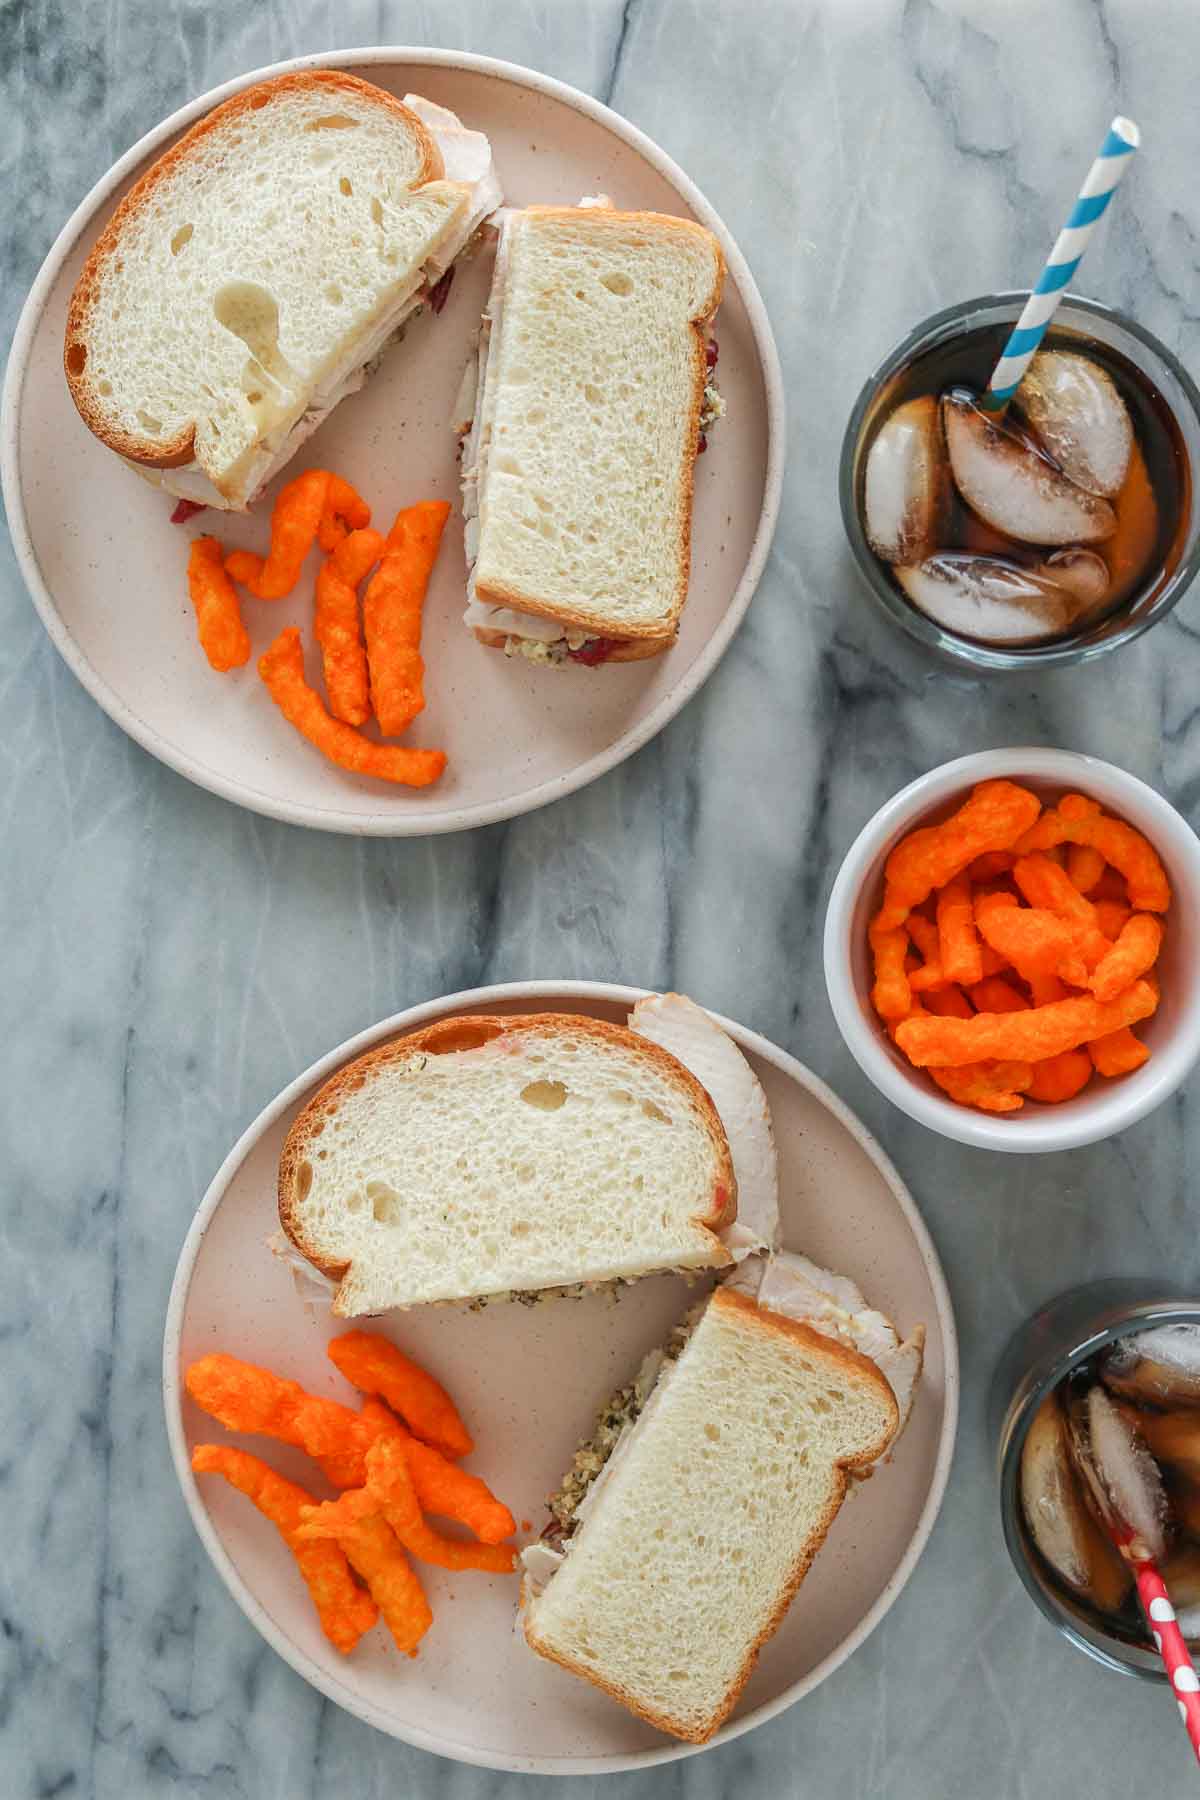 Two turkey and dressing sandwiches on plates with crunchy cheese puffs and glasses of soda.